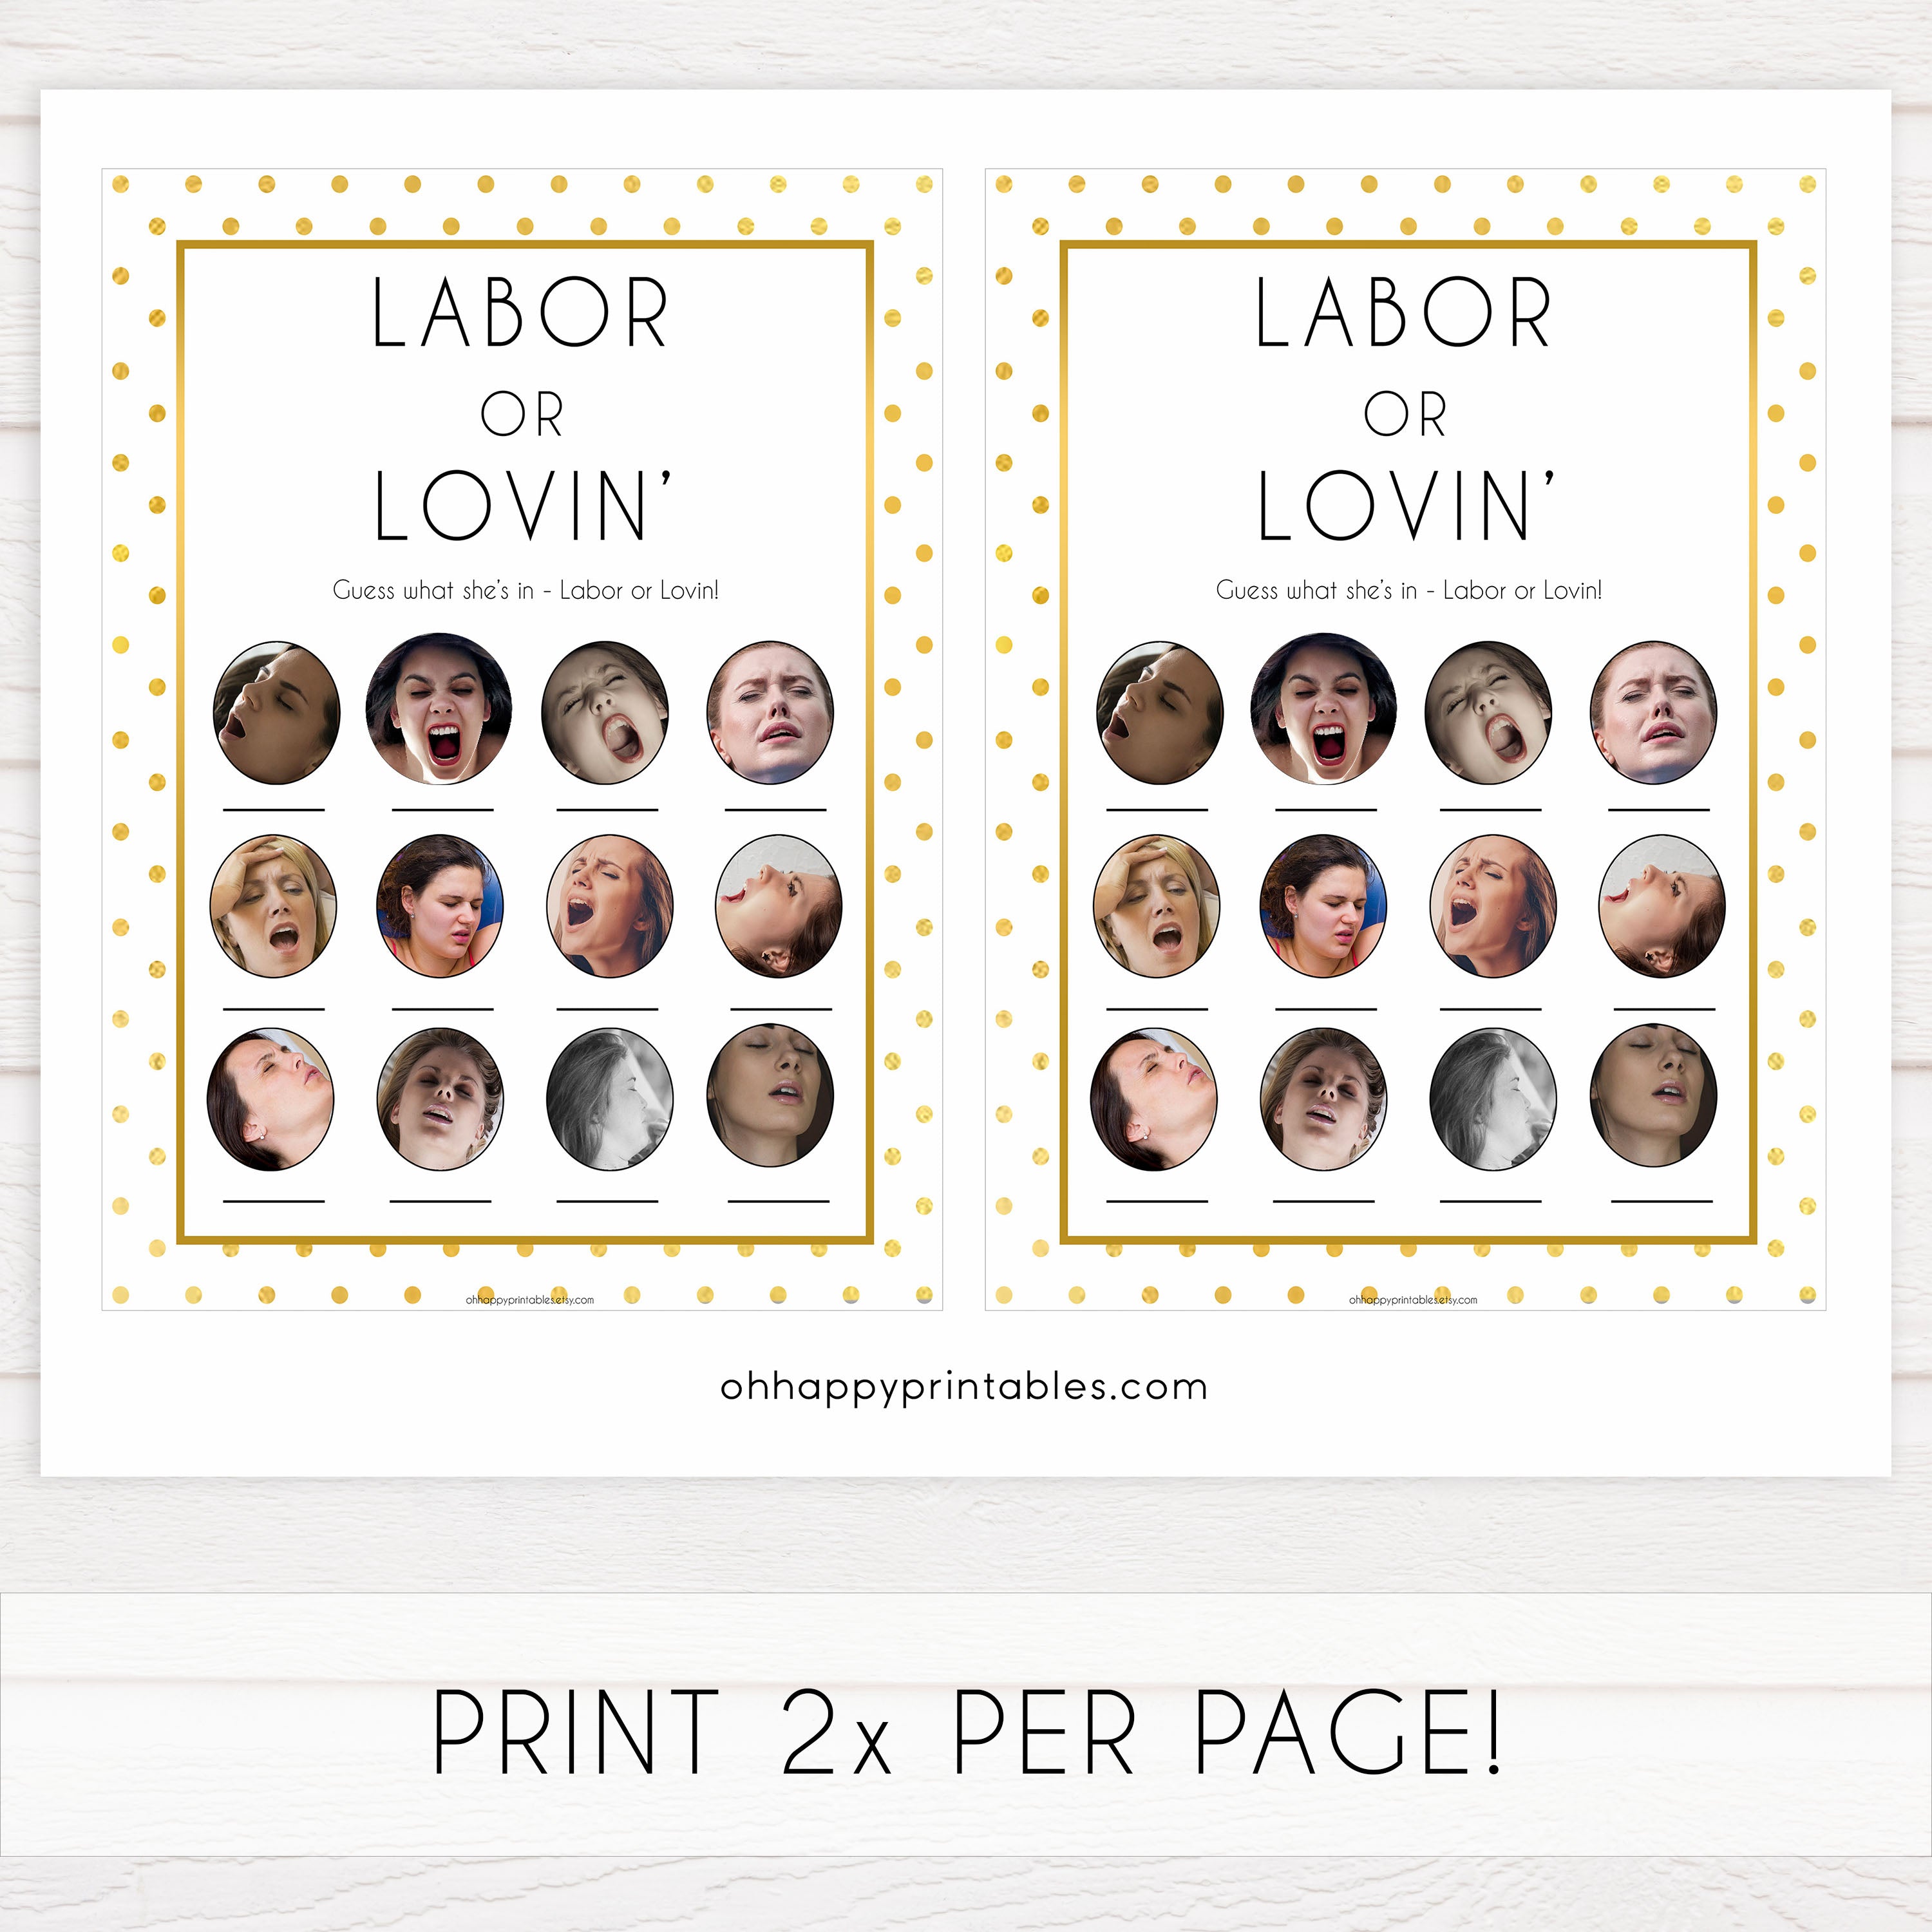 labor or lovin, labor or porn, Printable baby shower games, baby gold dots fun baby games, baby shower games, fun baby shower ideas, top baby shower ideas, gold glitter shower baby shower, friends baby shower ideas